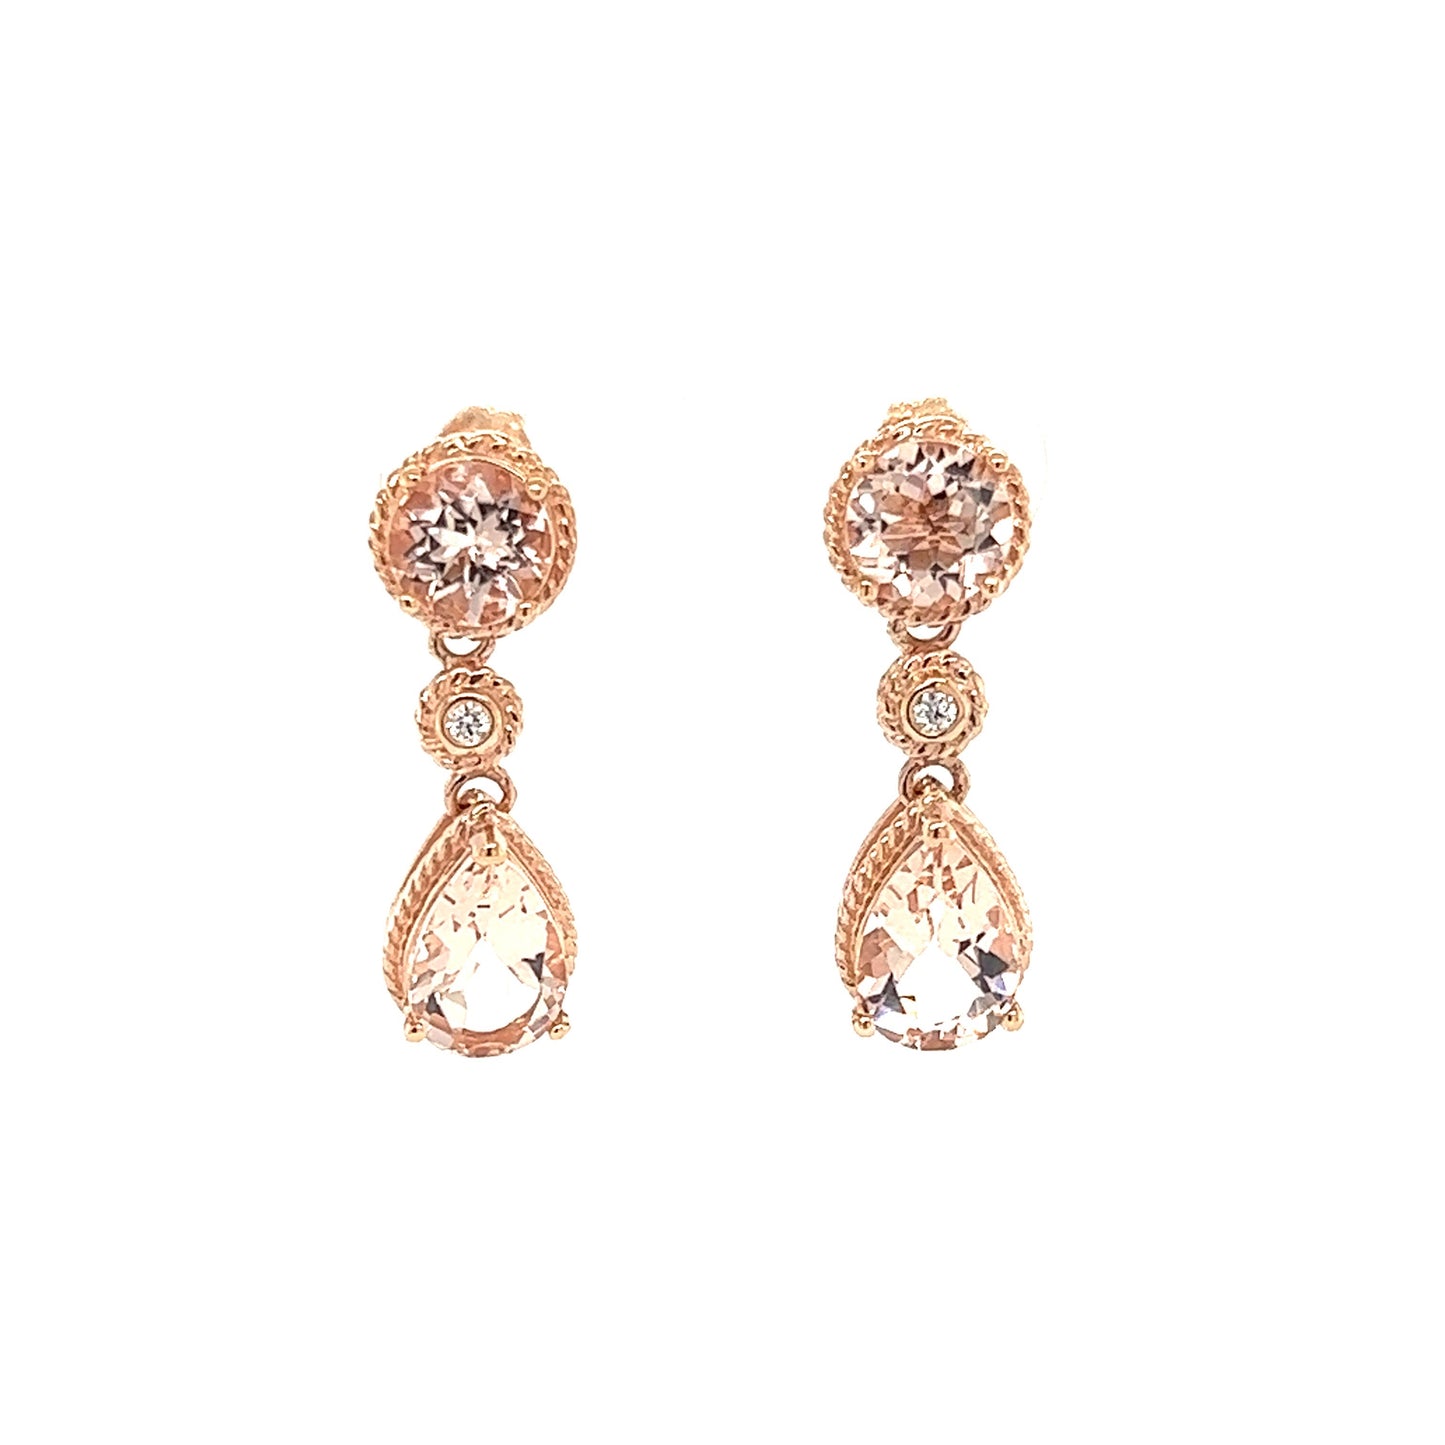 Morganite Dangle Earrings with a Round Bezel Diamond in 14K Rose Gold Front View